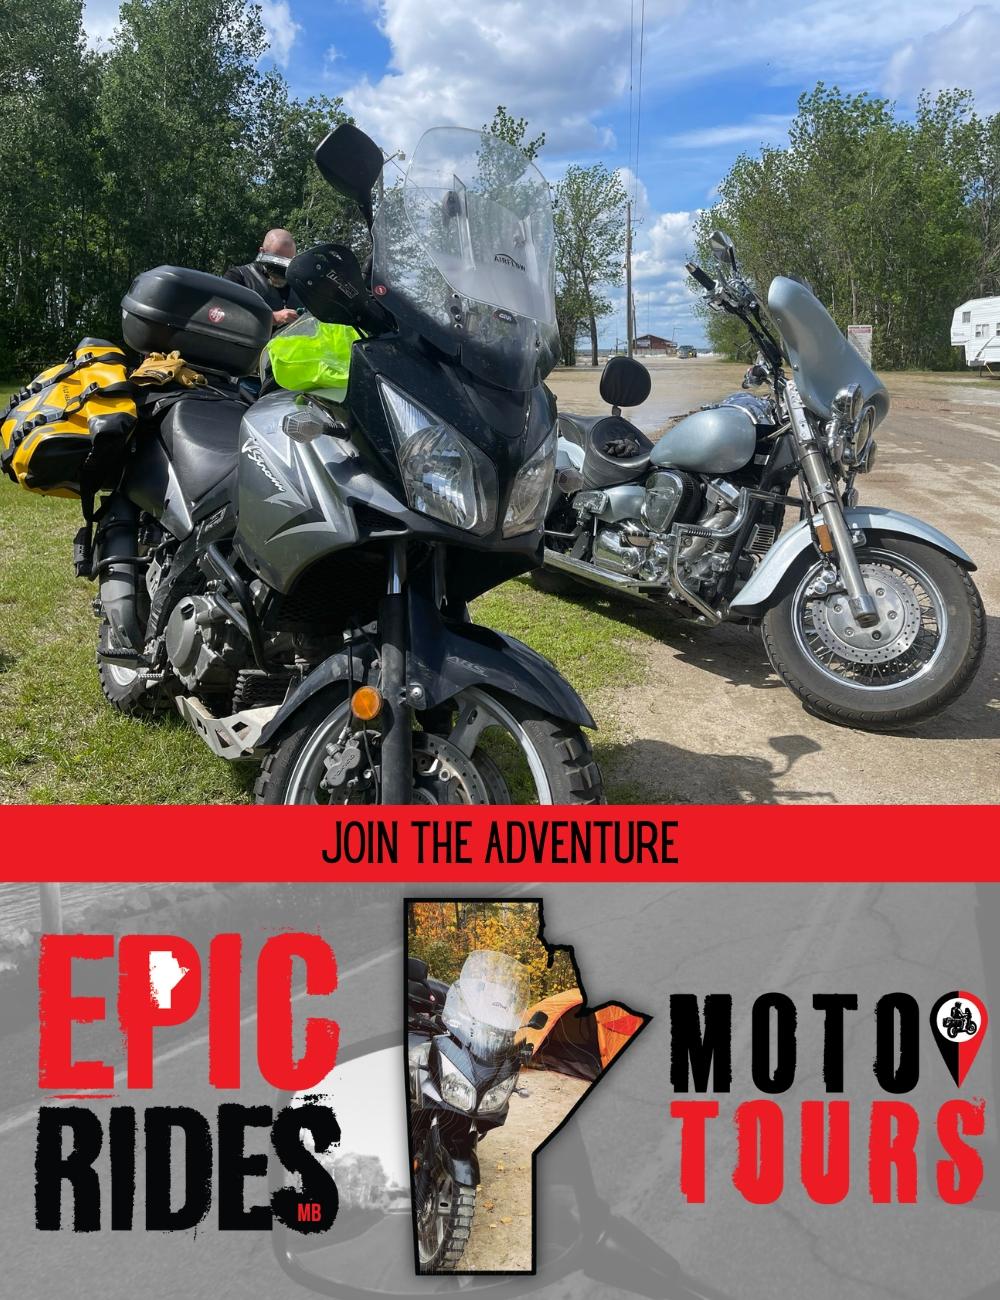 Poster for Epic Rides MB Moto Tours. Poster include and image of two motorcycles and the Epic Rides MB logo.